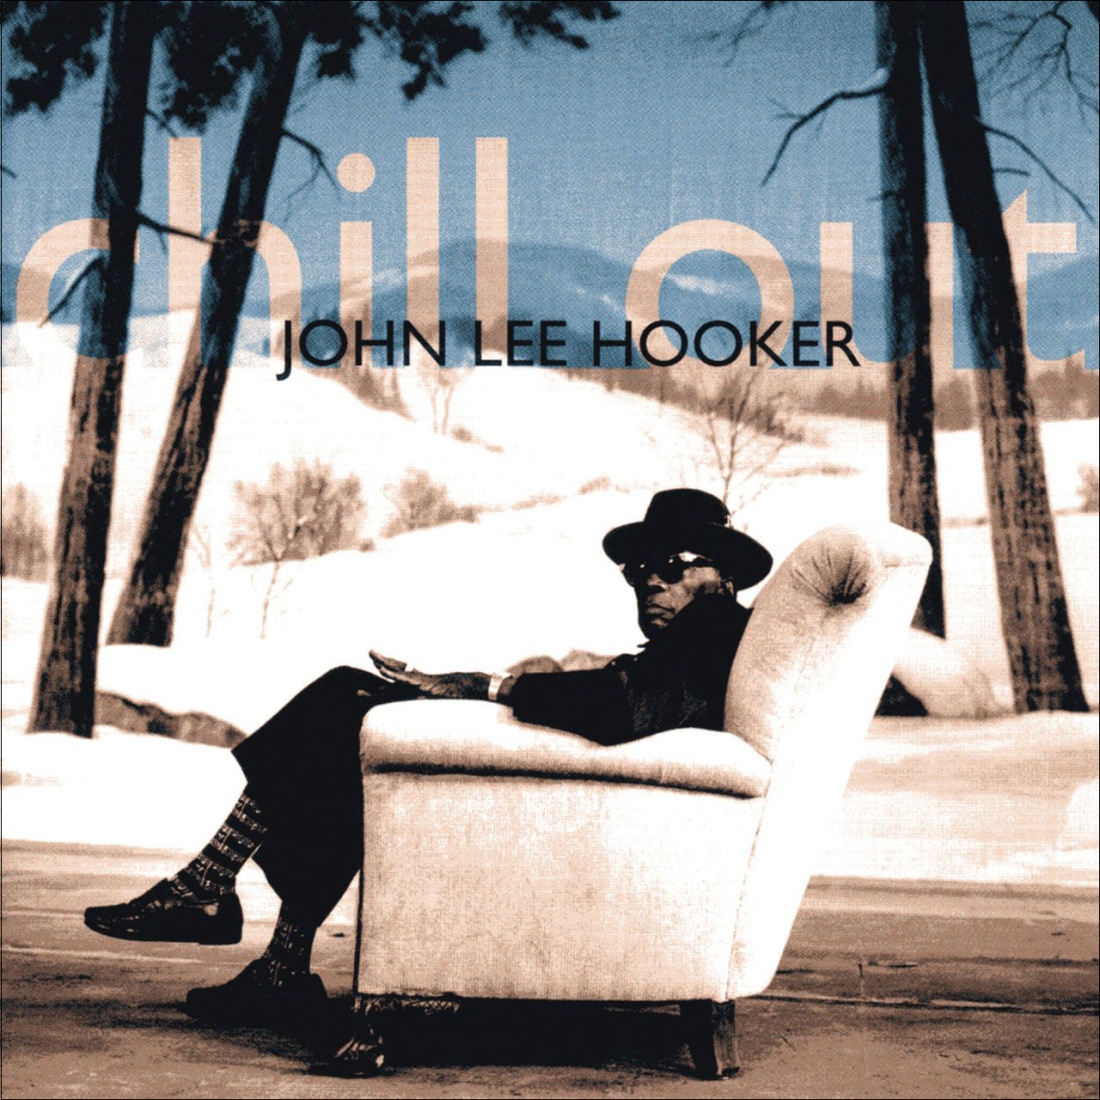 great-too-young-listen-to-too-young-by-john-lee-hooker-on-tidal-john-lee-furniture--john-lee-furniture.jpg